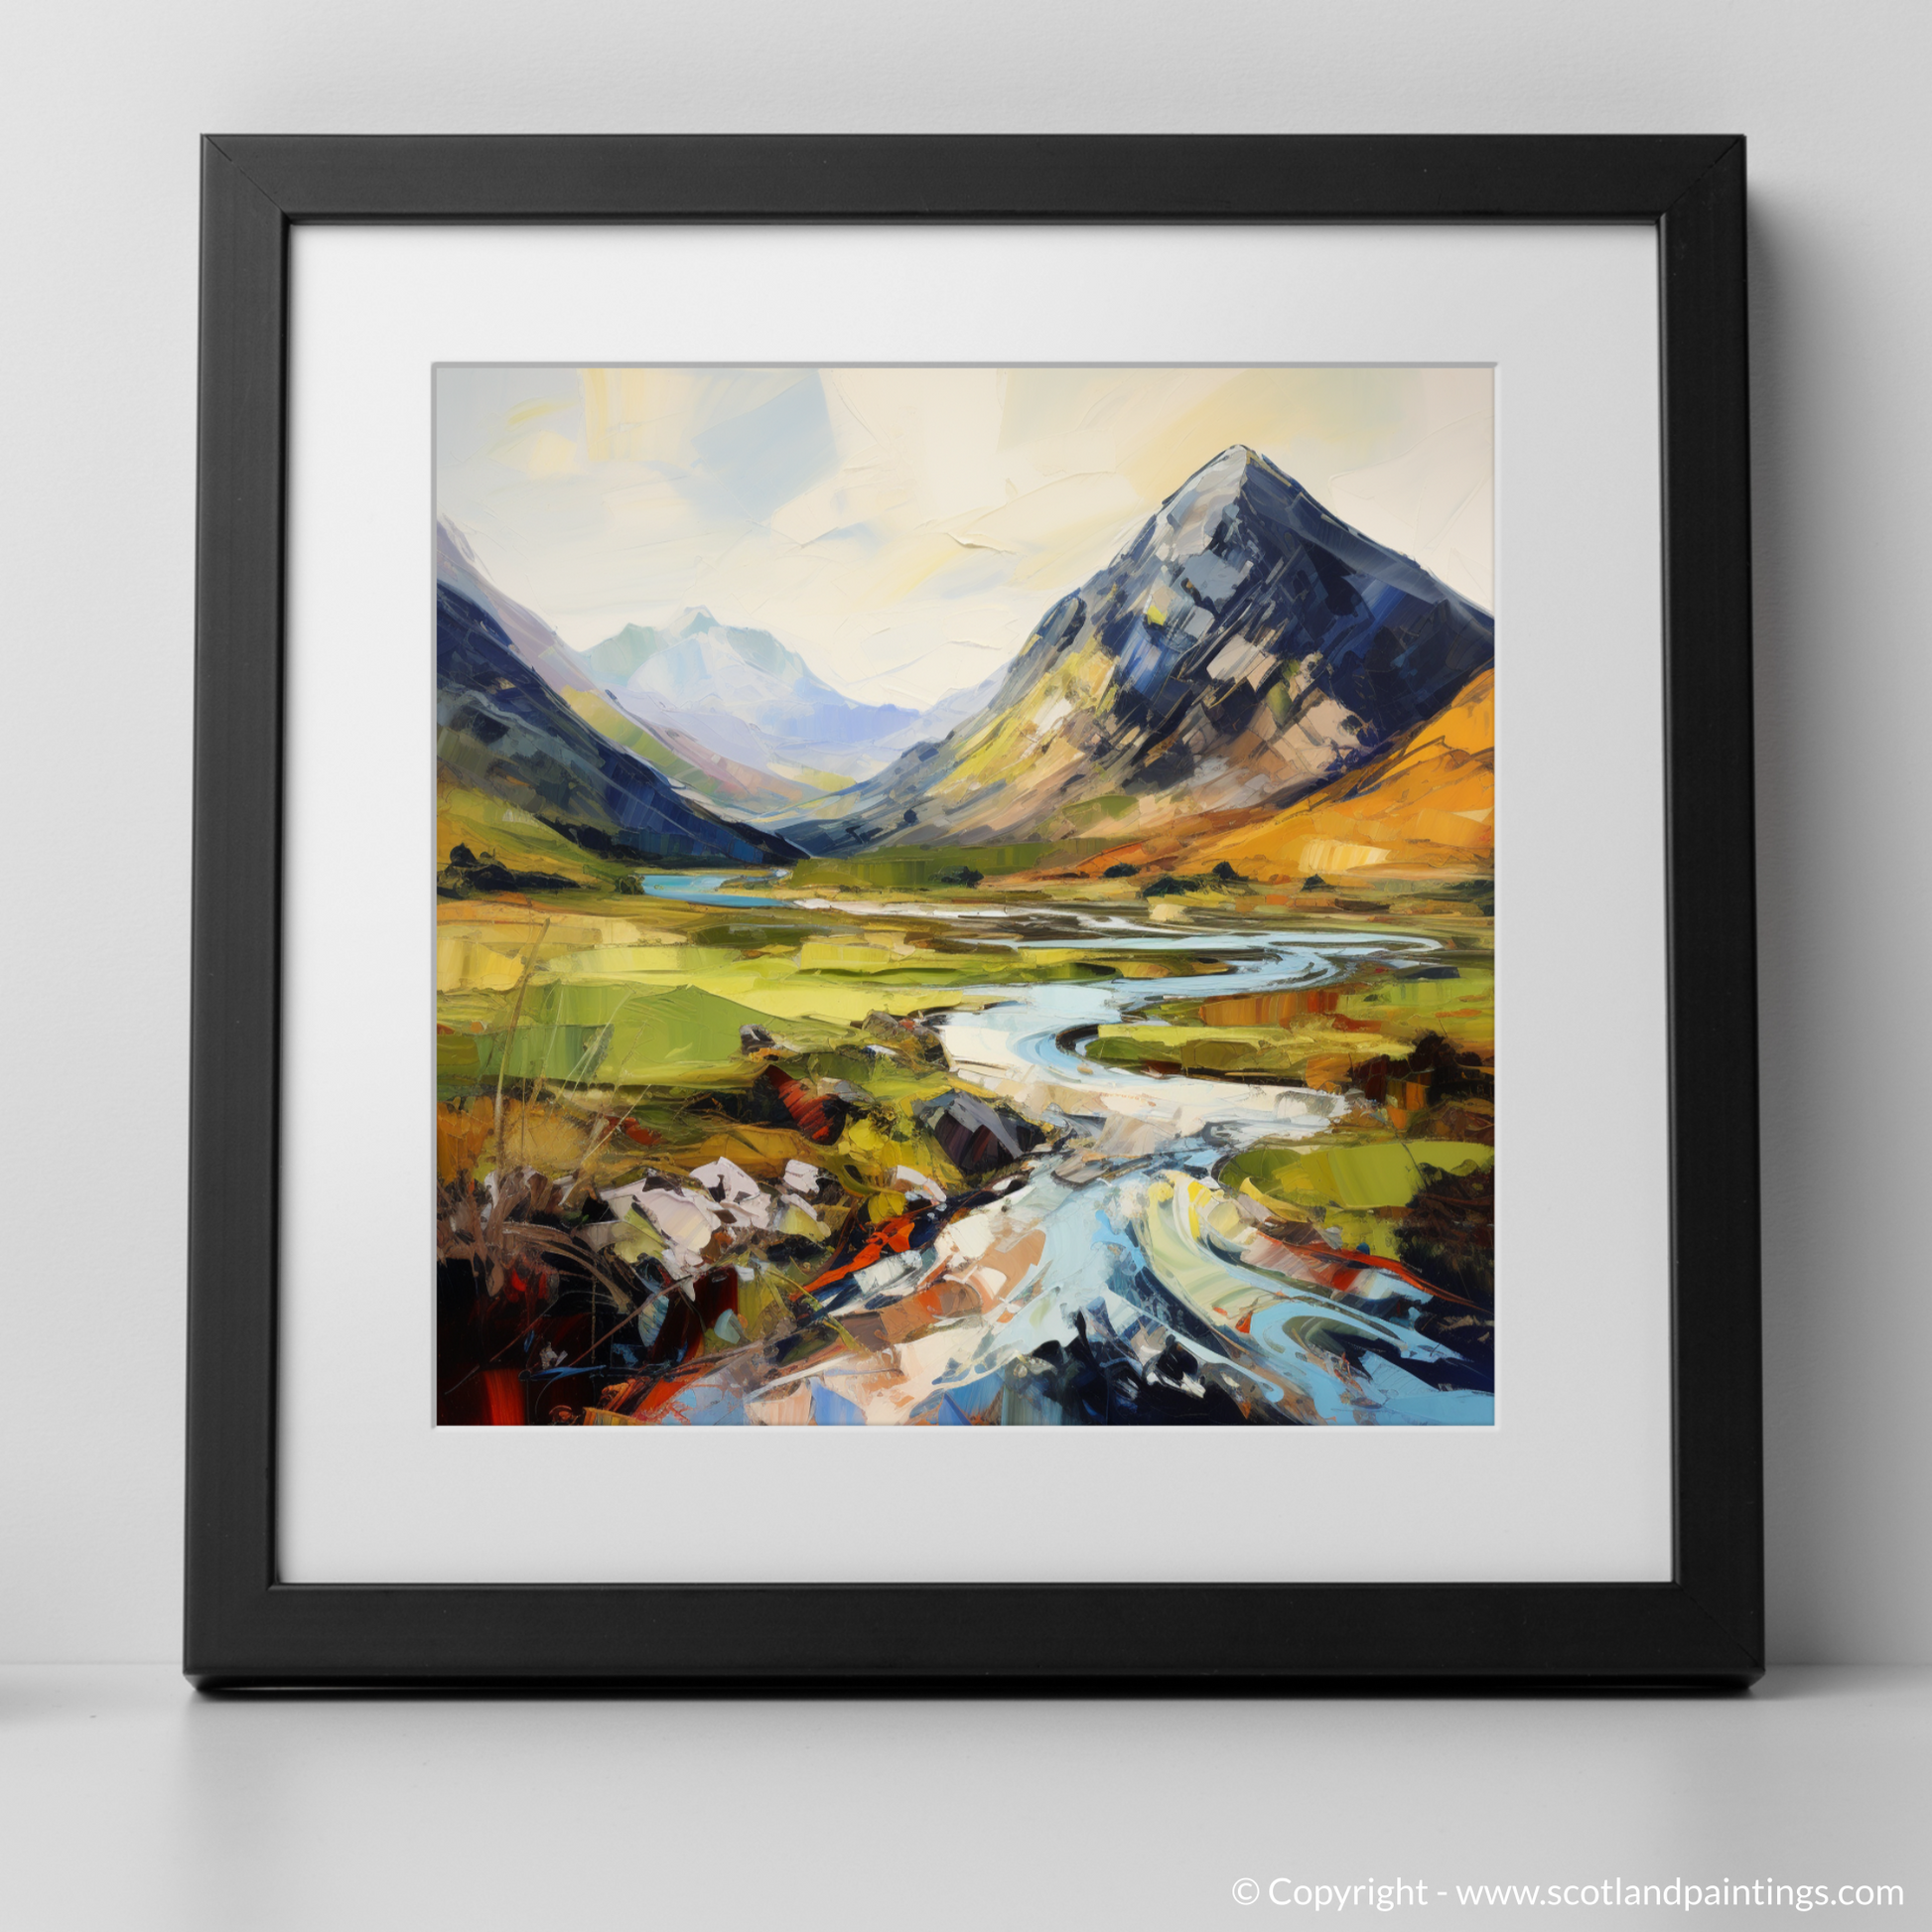 Art Print of Glencoe, Argyll and Bute with a black frame